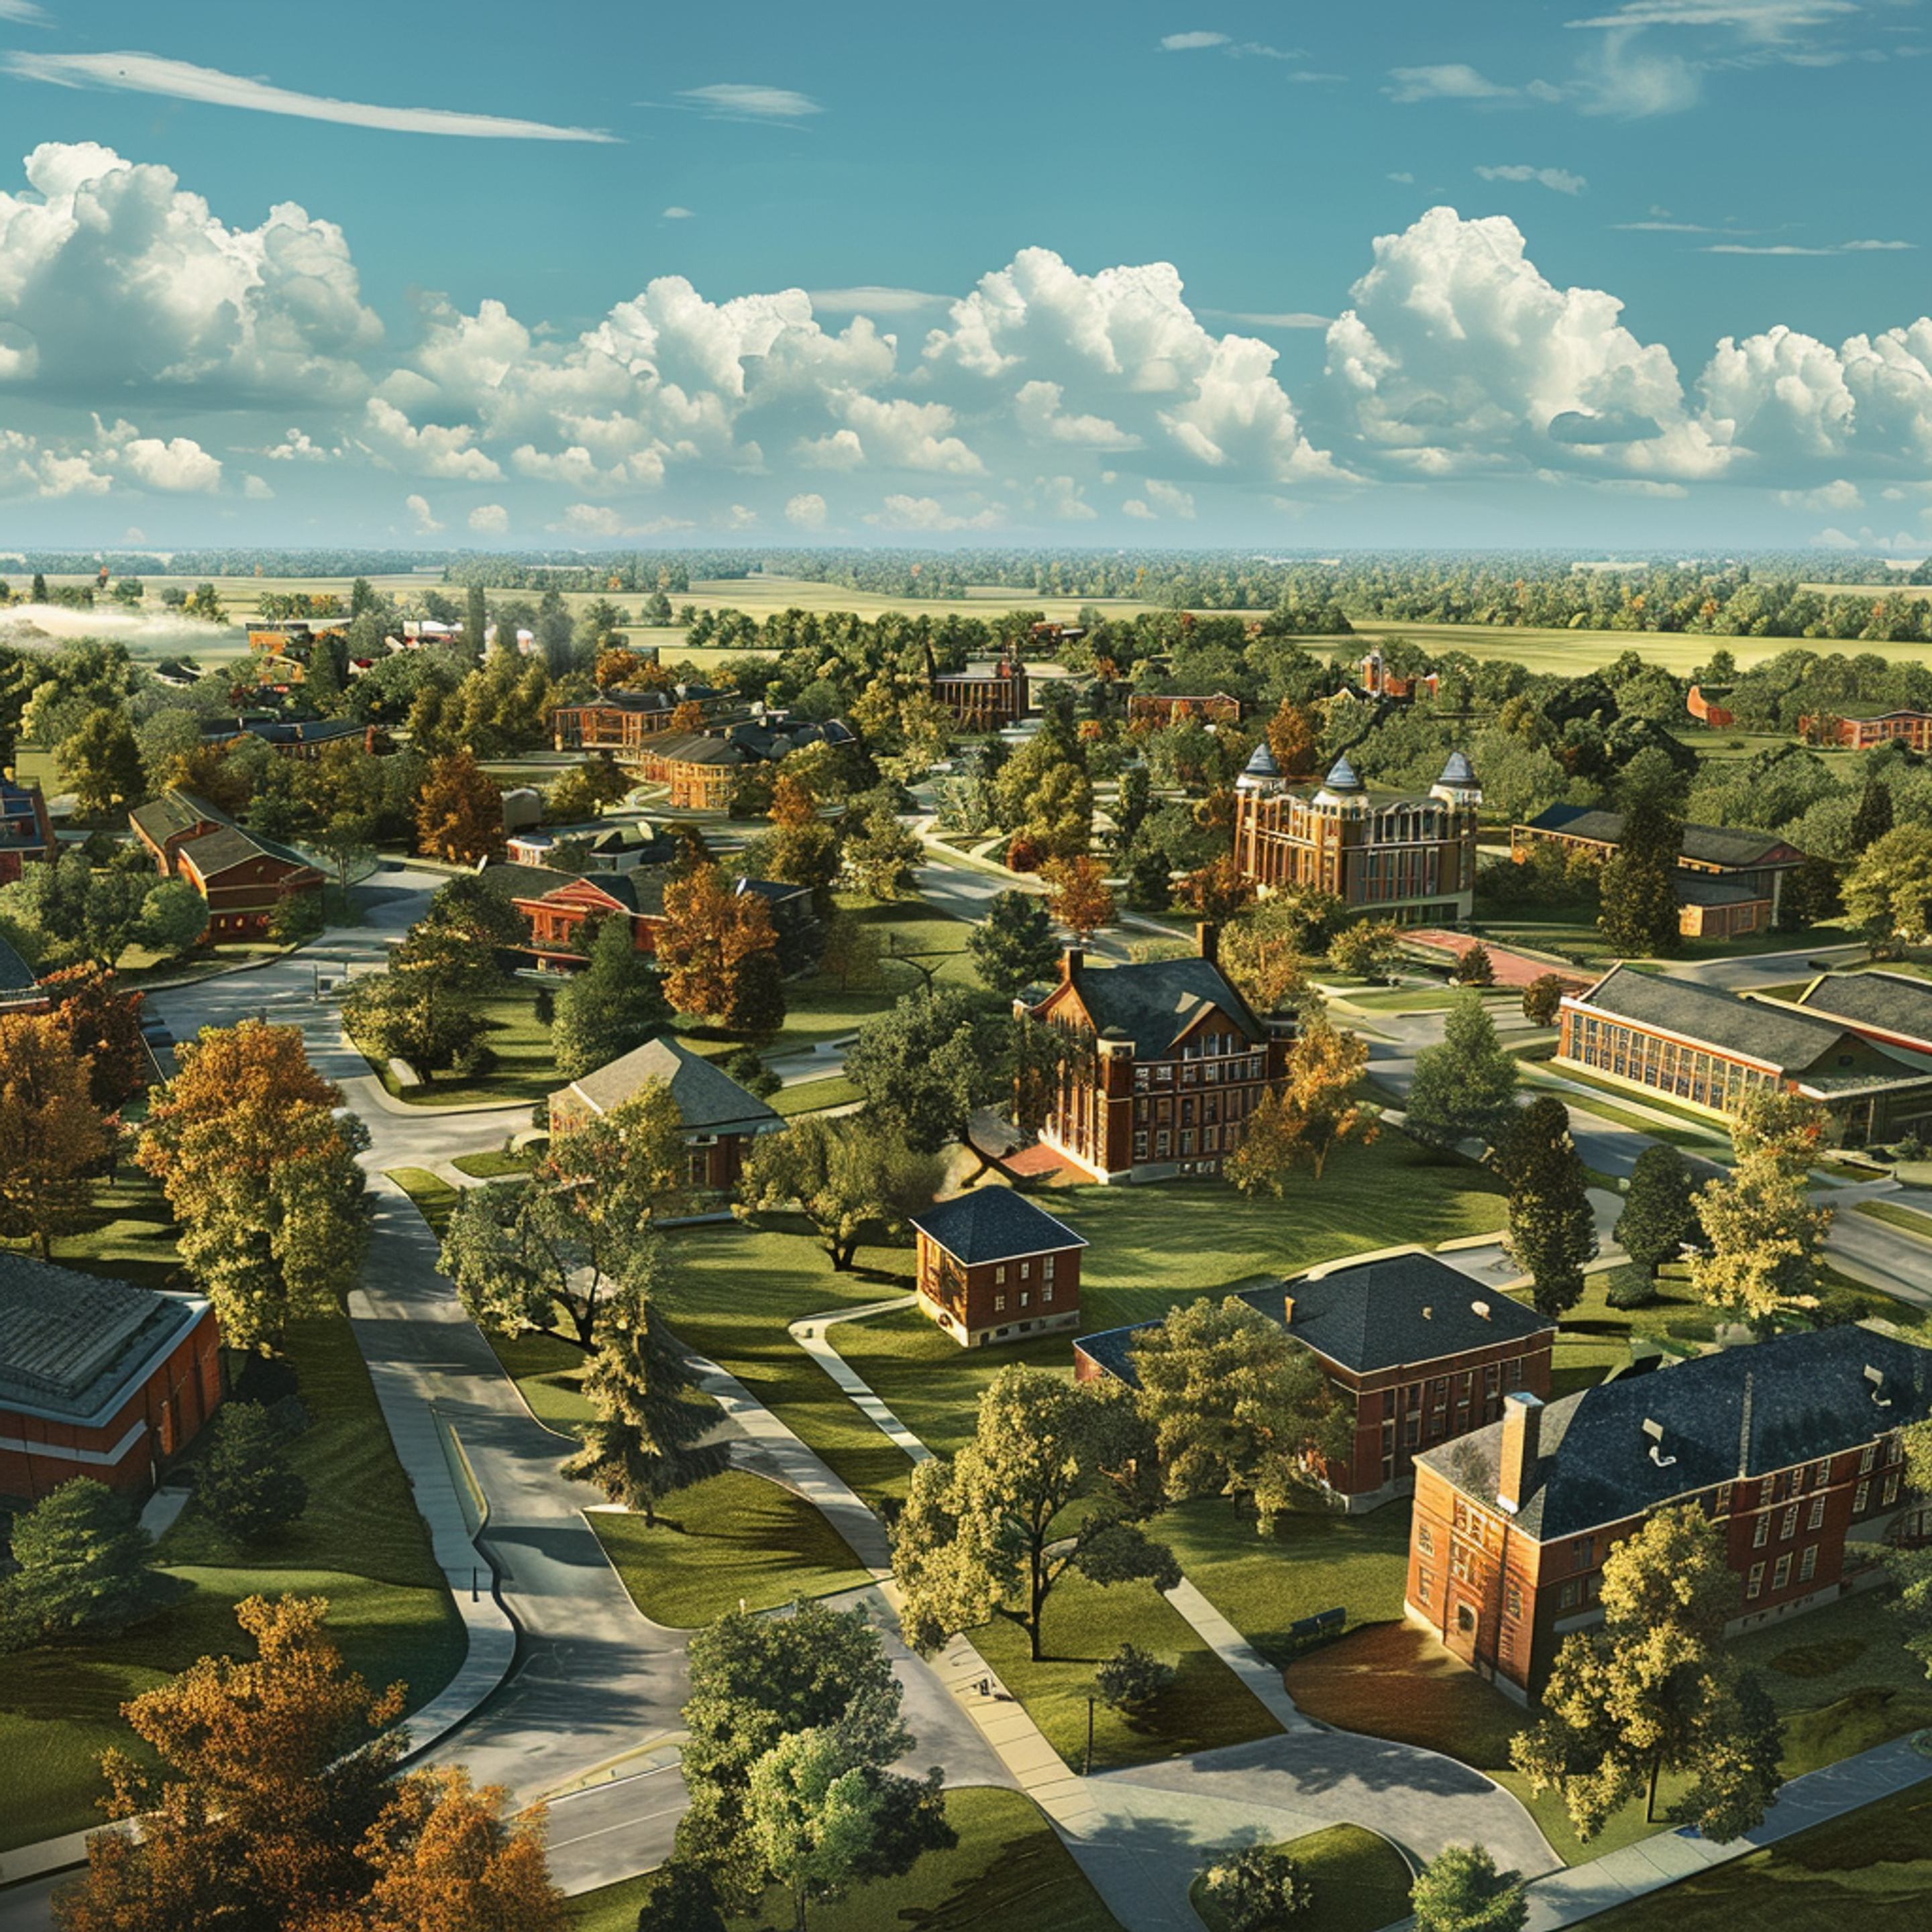 Aerial view of Rolla, MO, showcasing the Missouri University of Science and Technology campus with its classic red-brick buildings amidst lush greenery. Tree-lined pathways intersect the grounds while cumulus clouds dot the expansive blue sky overhead.